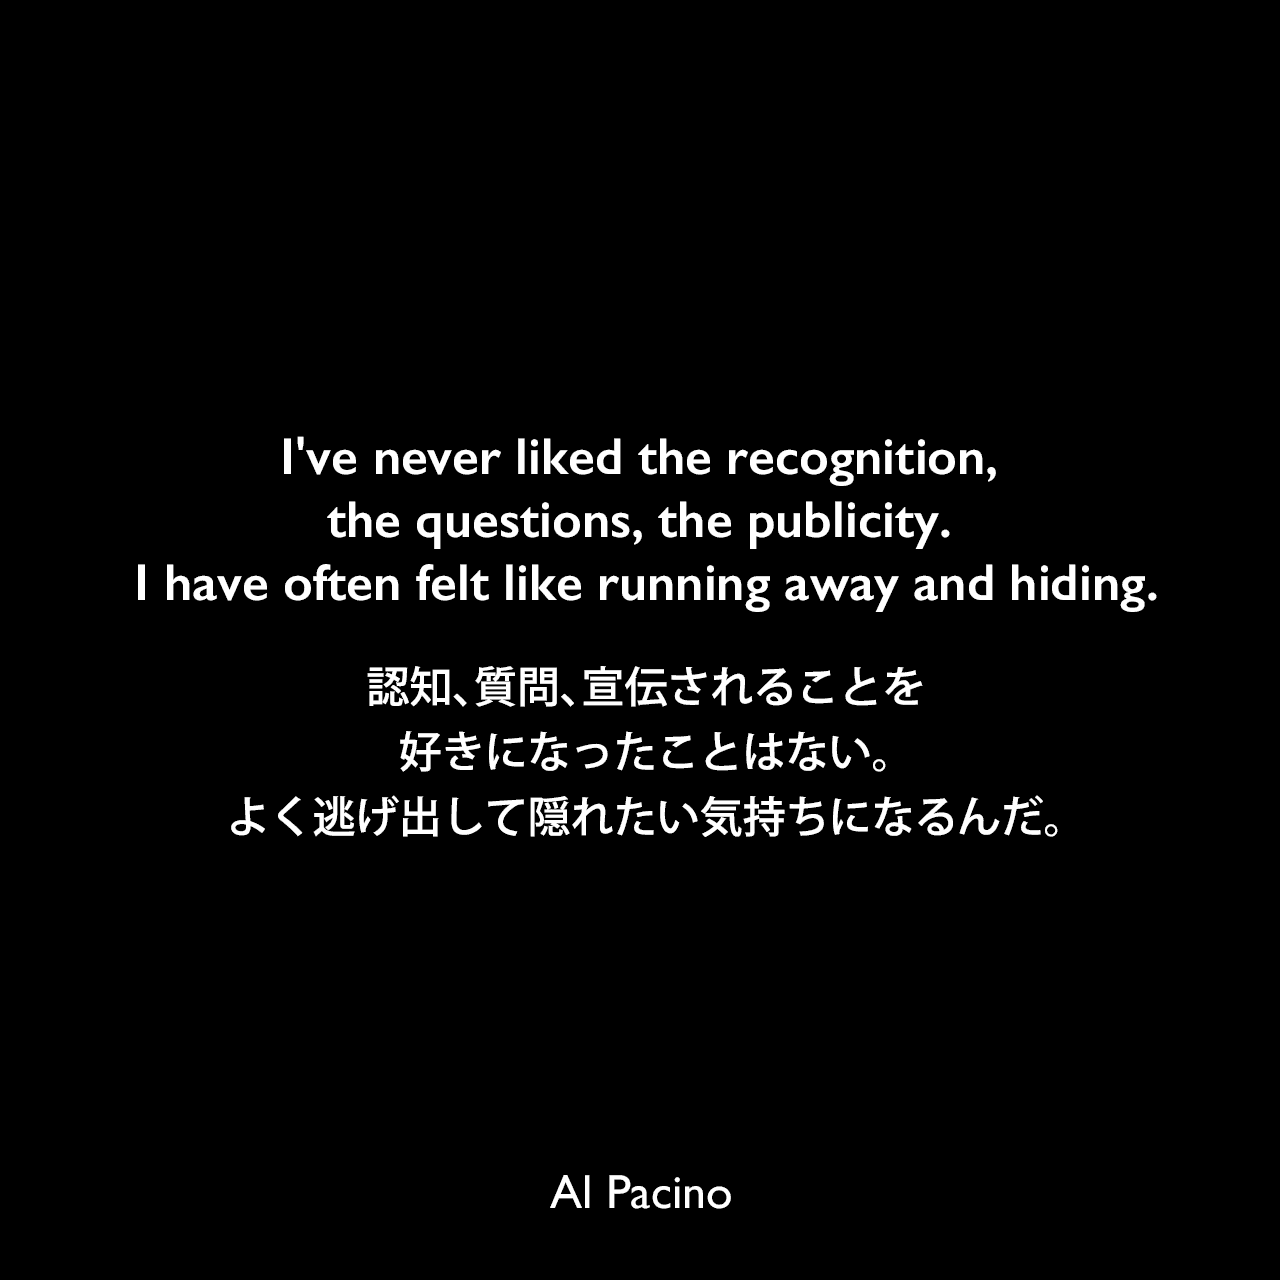 I've never liked the recognition, the questions, the publicity. I have often felt like running away and hiding.認知、質問、宣伝されることを好きになったことはない。よく逃げ出して隠れたい気持ちになるんだ。Al Pacino